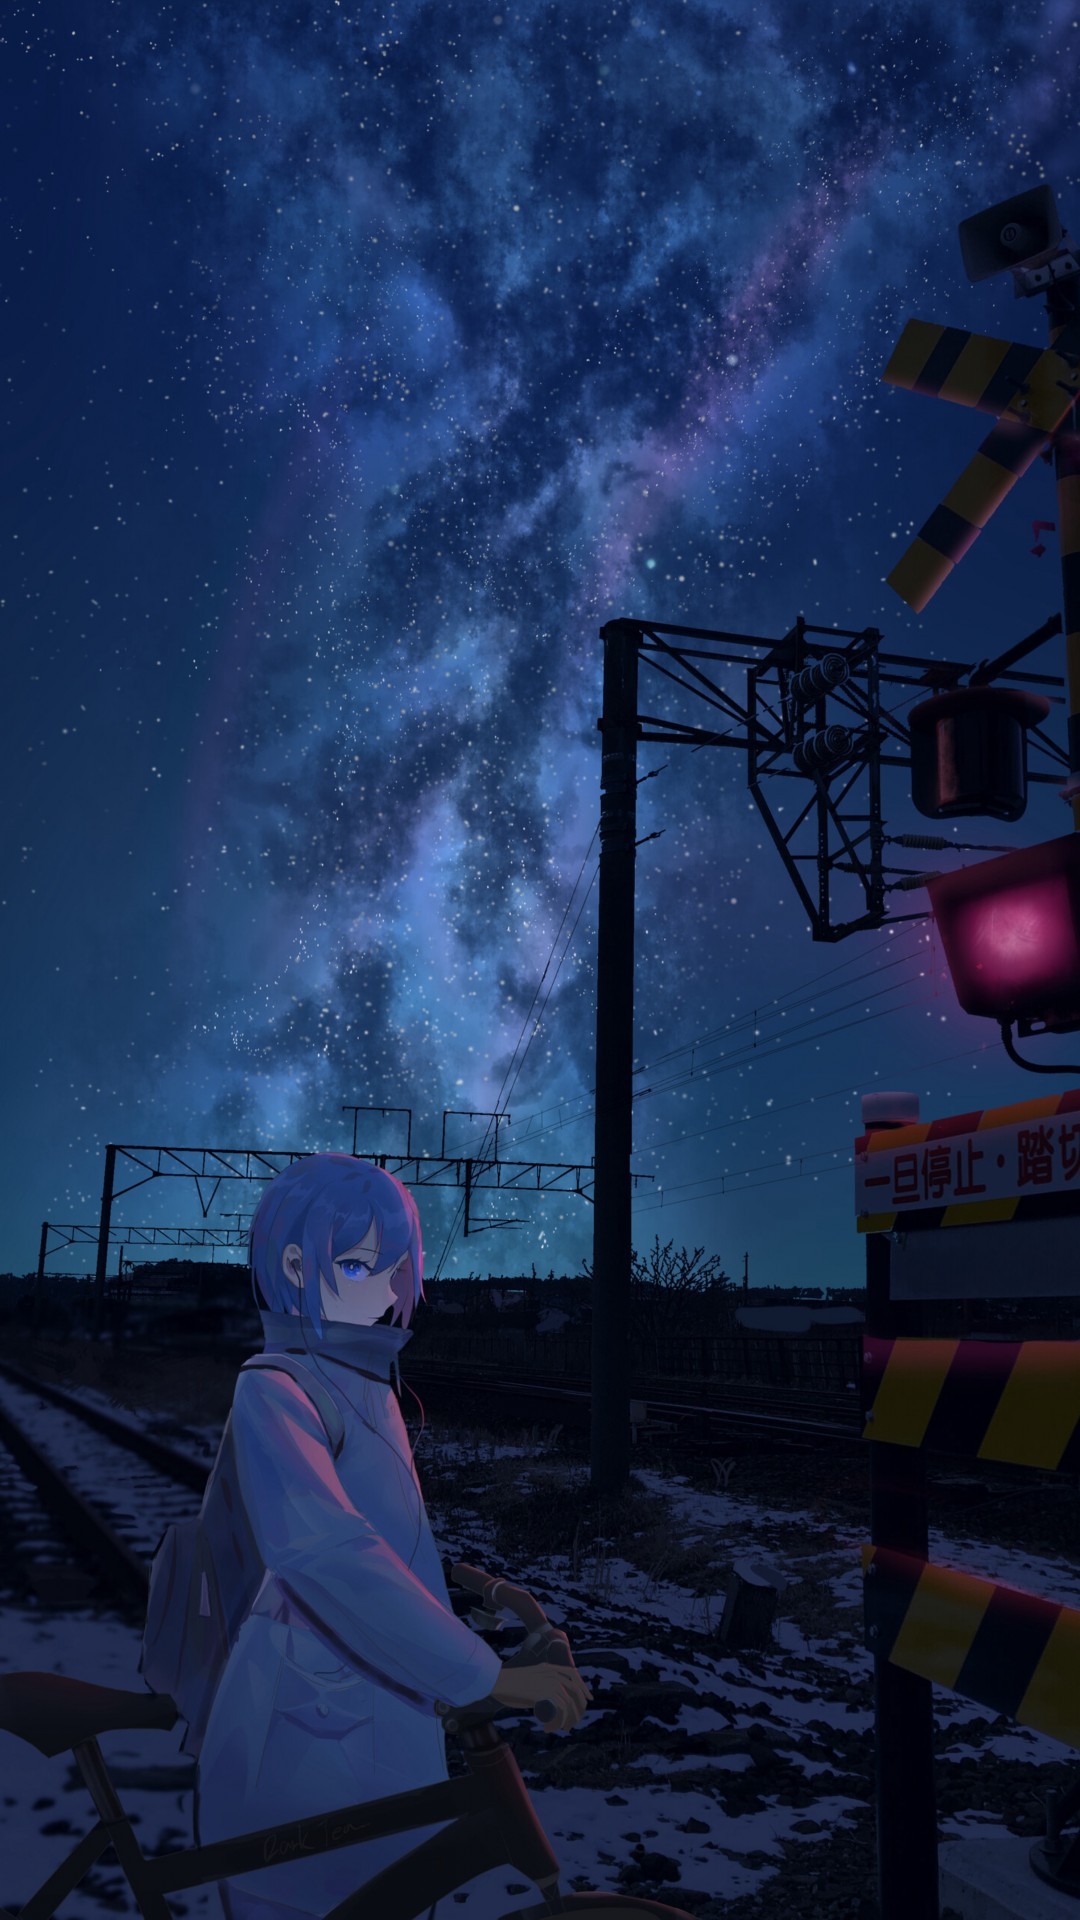 Download 1080x1920 Anime Girl, Stars, Night, Scenic, Railway, Earphones Wallpaper for iPhone iPhone 7 Plus, iPhone 6+, Sony Xperia Z, HTC One